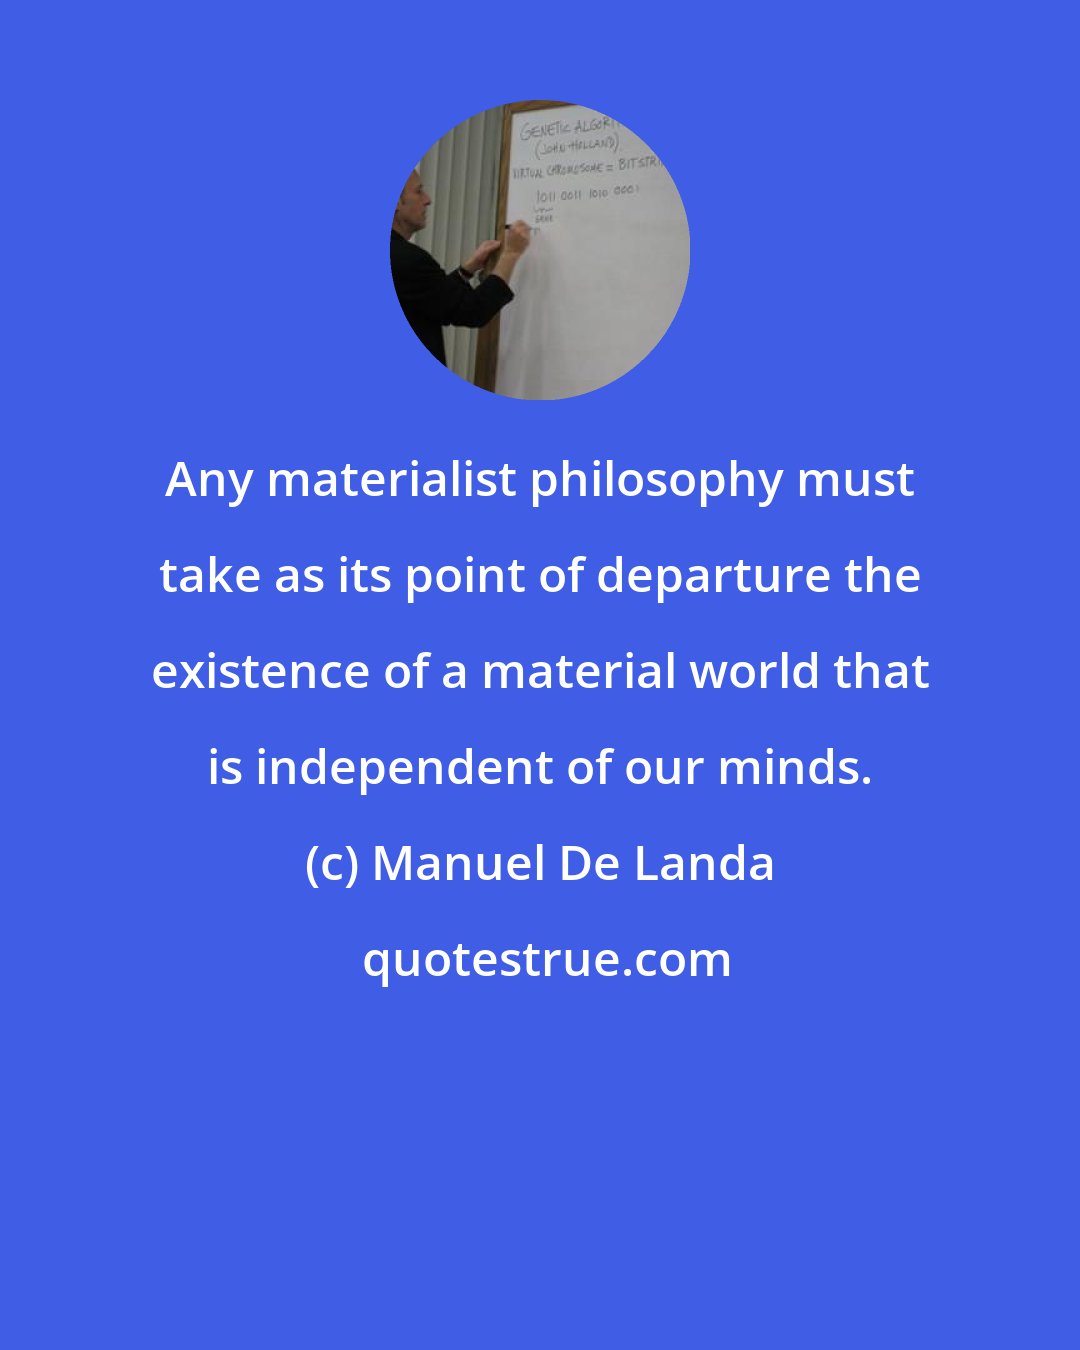 Manuel De Landa: Any materialist philosophy must take as its point of departure the existence of a material world that is independent of our minds.